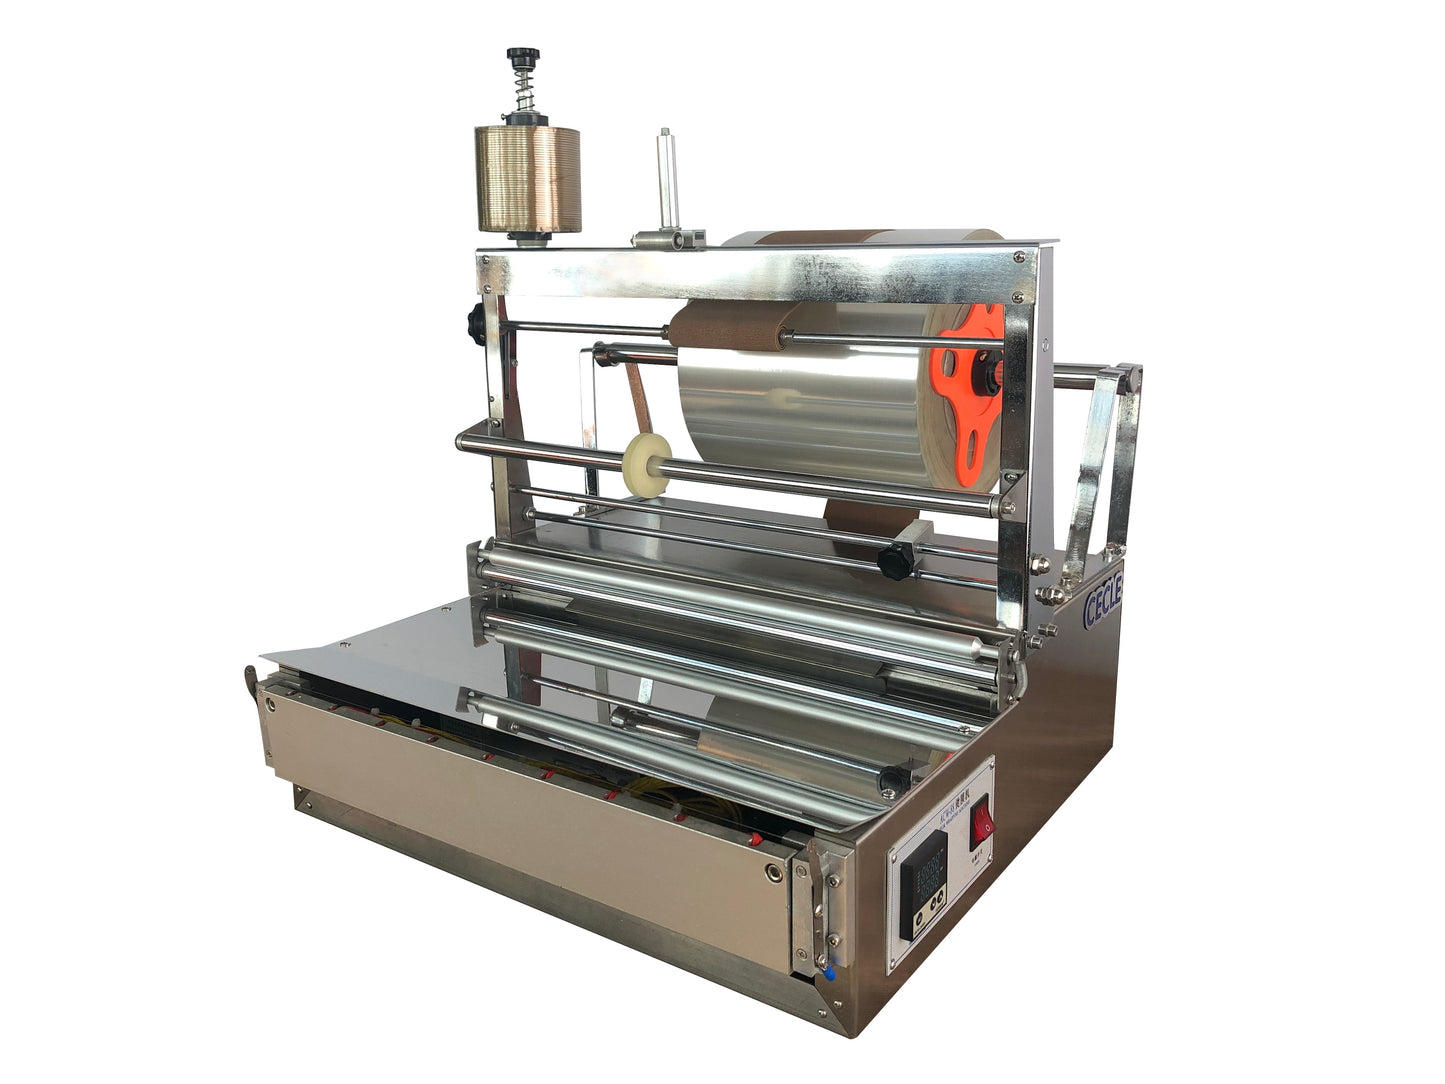 ACW-88 Overwrapper For Perfume Box Wrapping Machine BOPP cellophane wrapping machine, CD and DVD wrapper